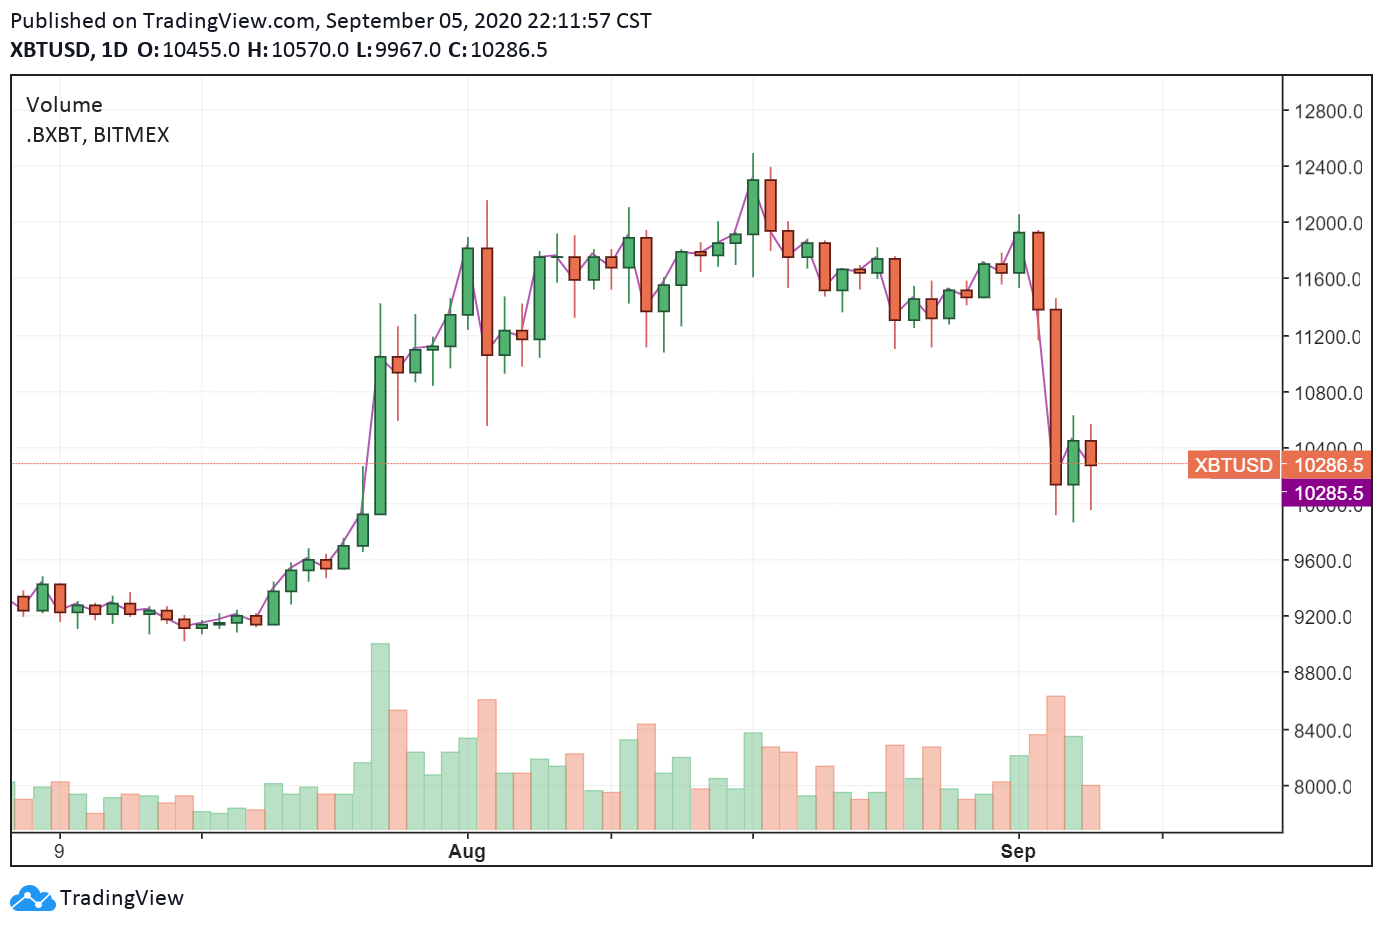 The daily chart of Bitcoin